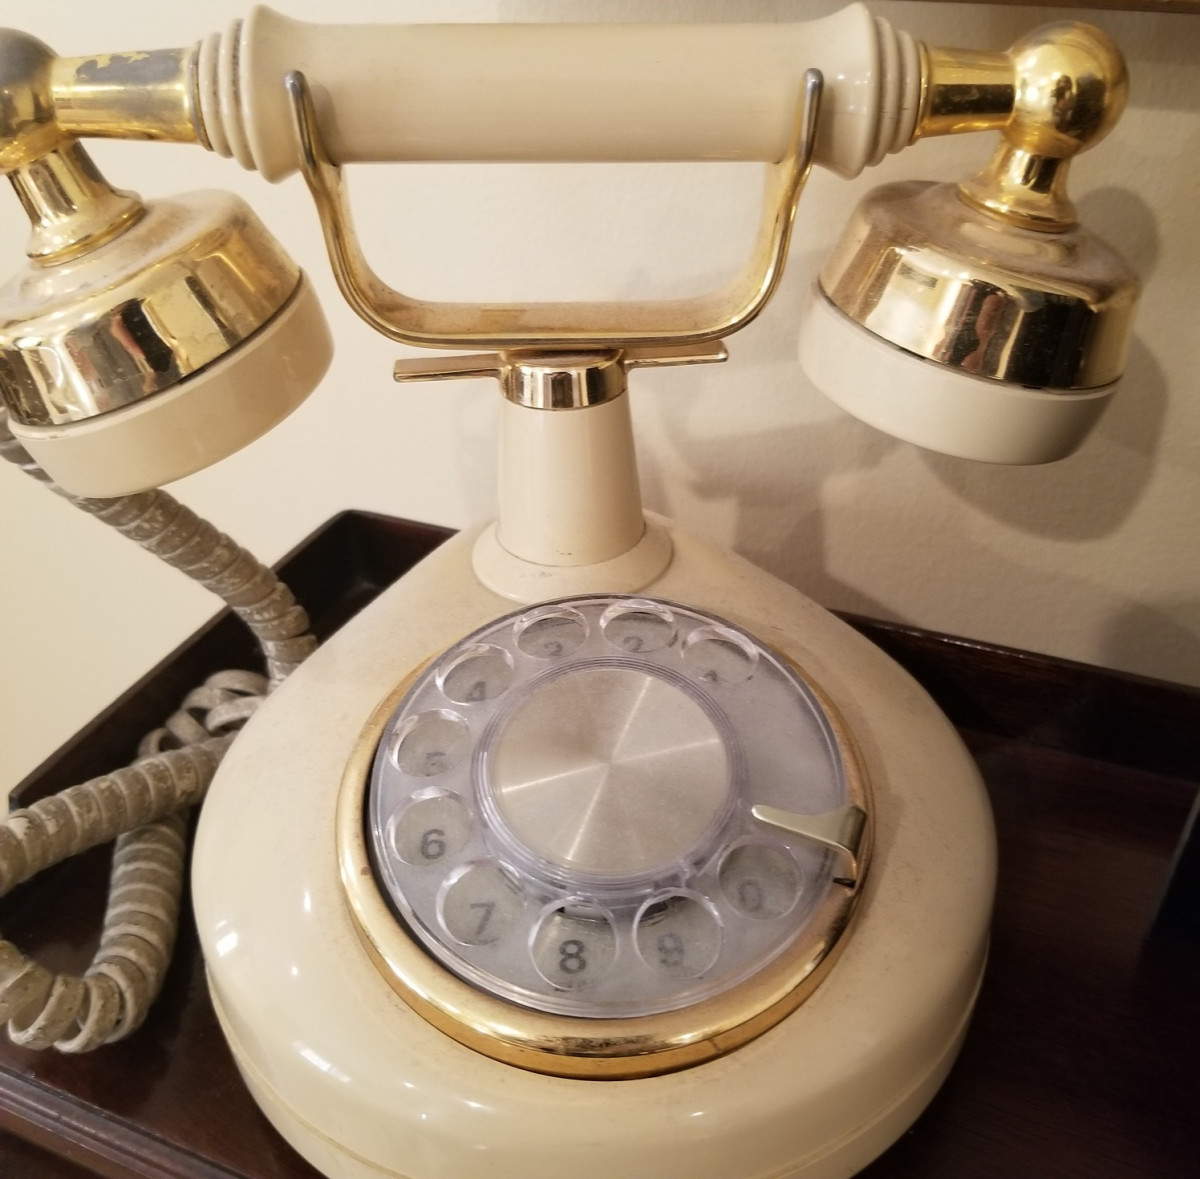 This is a reproduction, but notice the rotary style numbers of this landline. My phones are all push button, but I seldom use anything but automatic dial now.